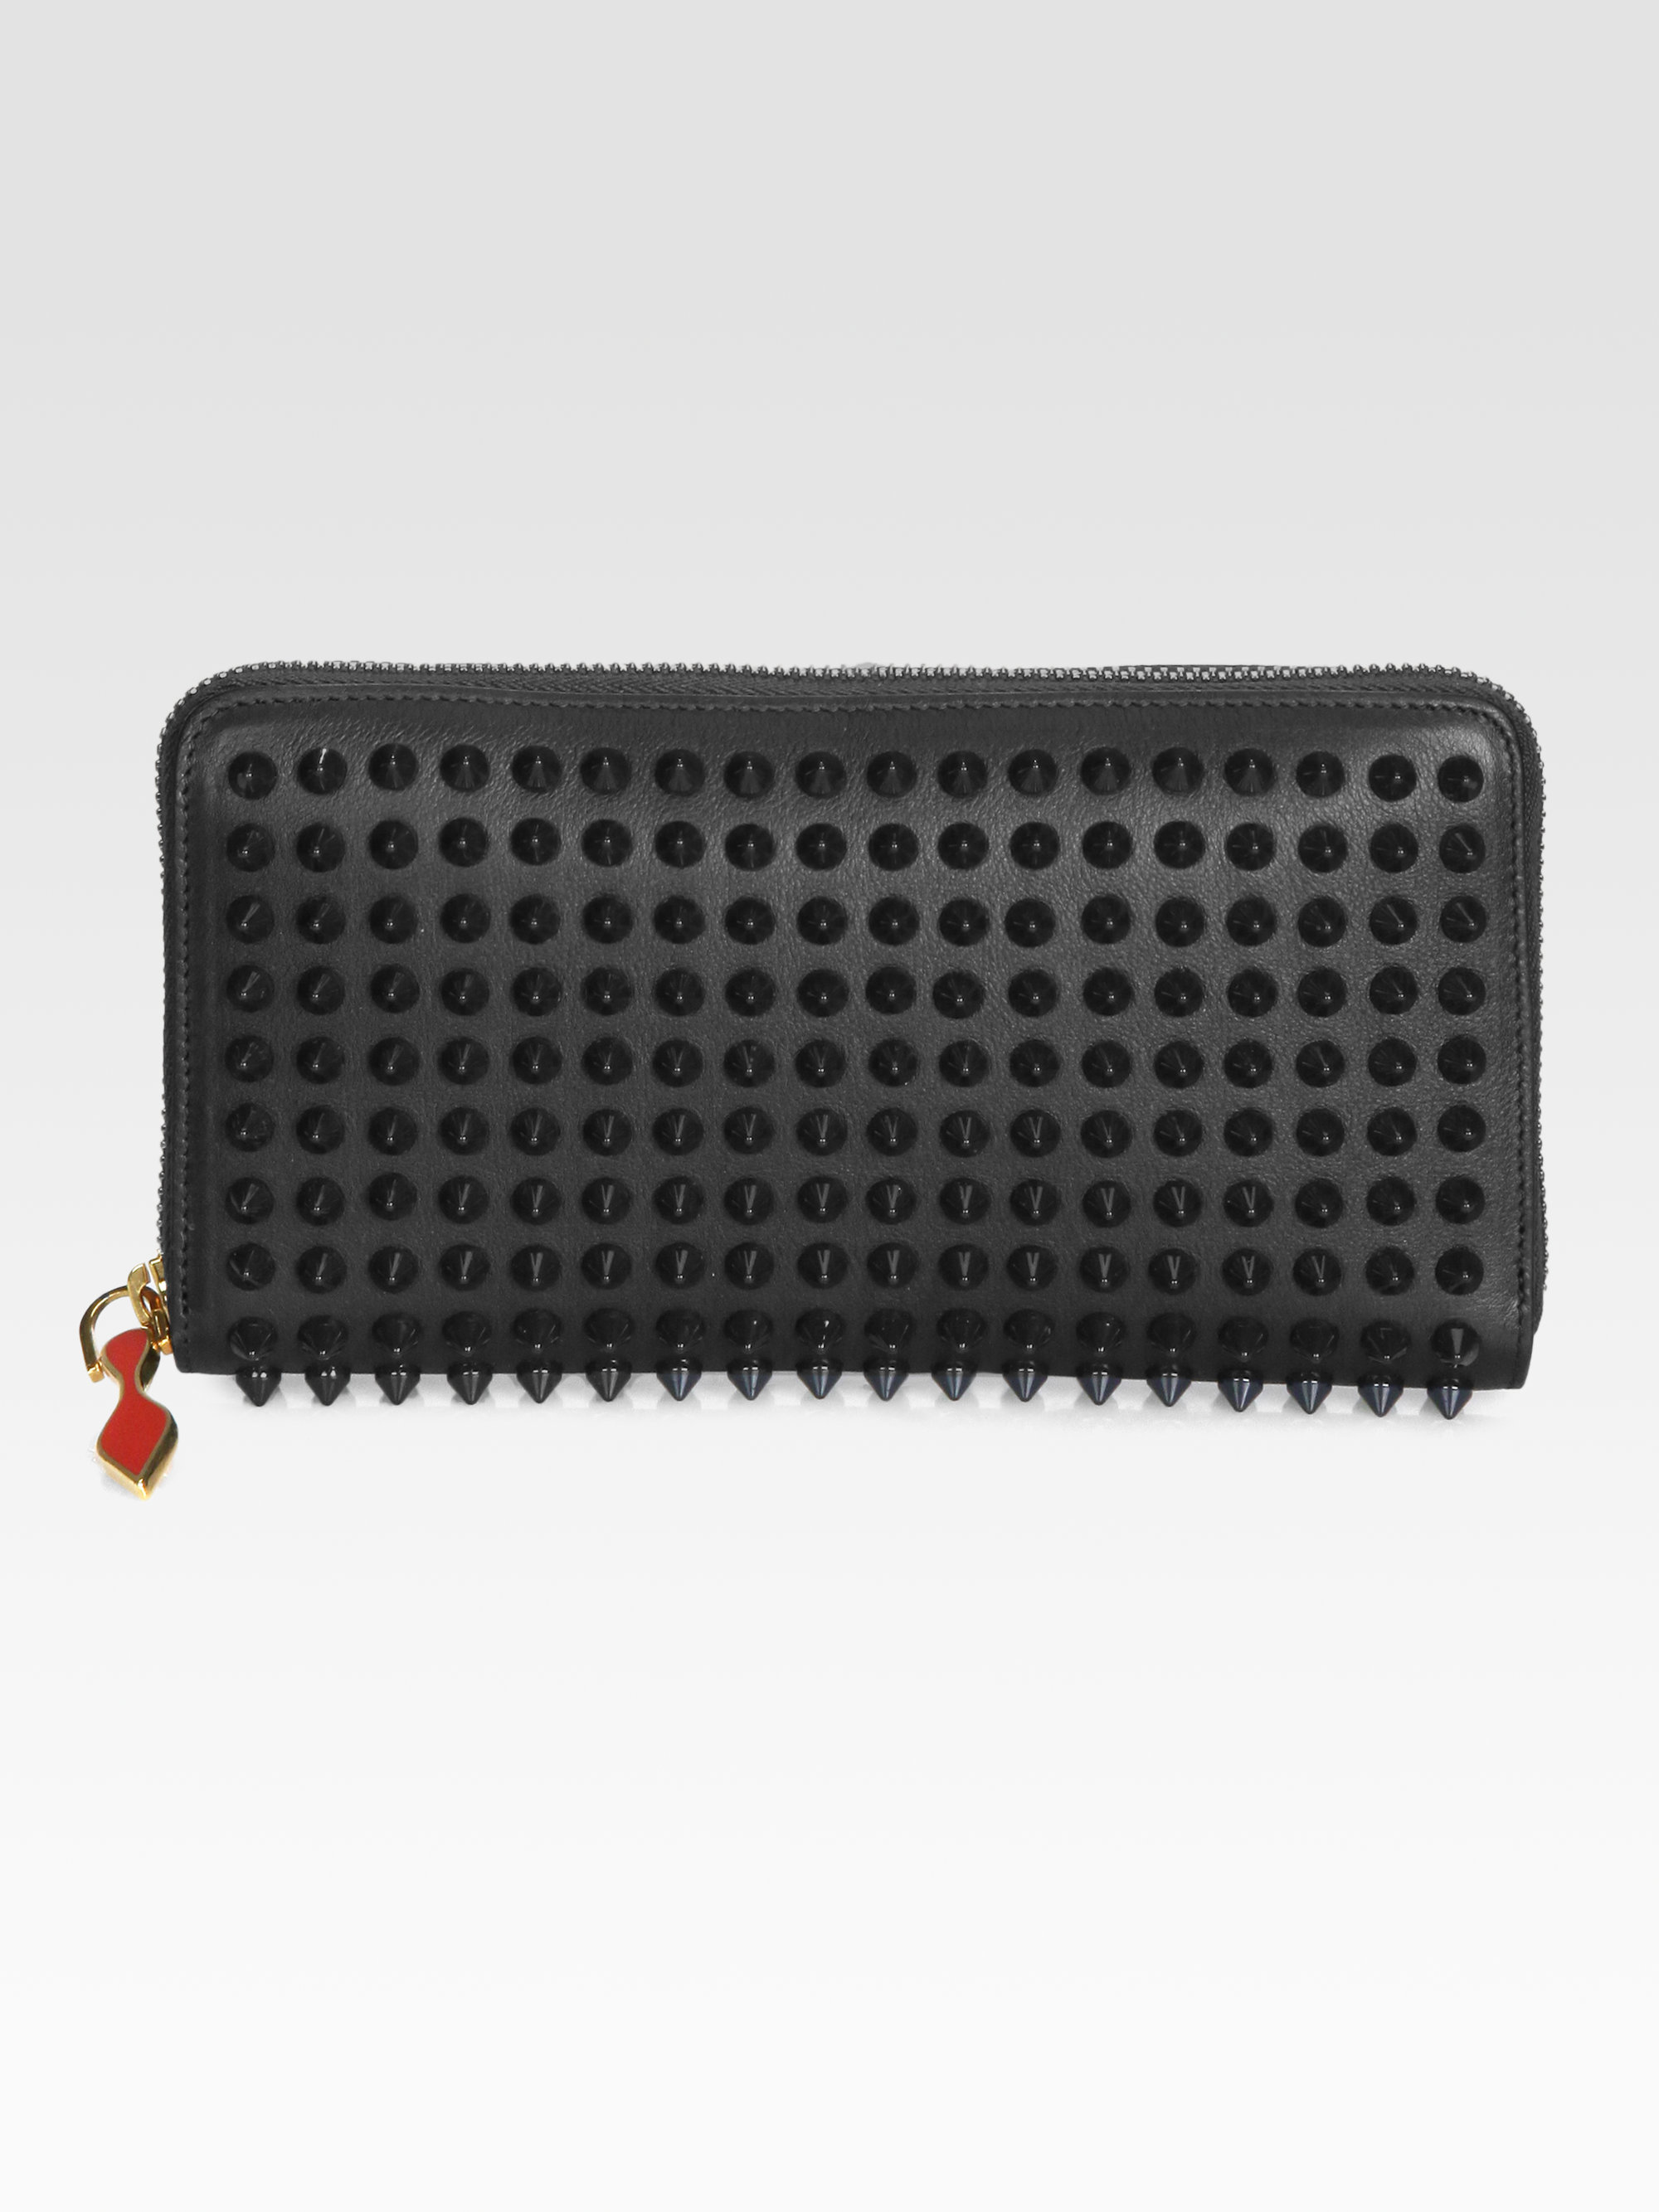 Lyst - Christian Louboutin Panettone Studded Continental Wallet in Black